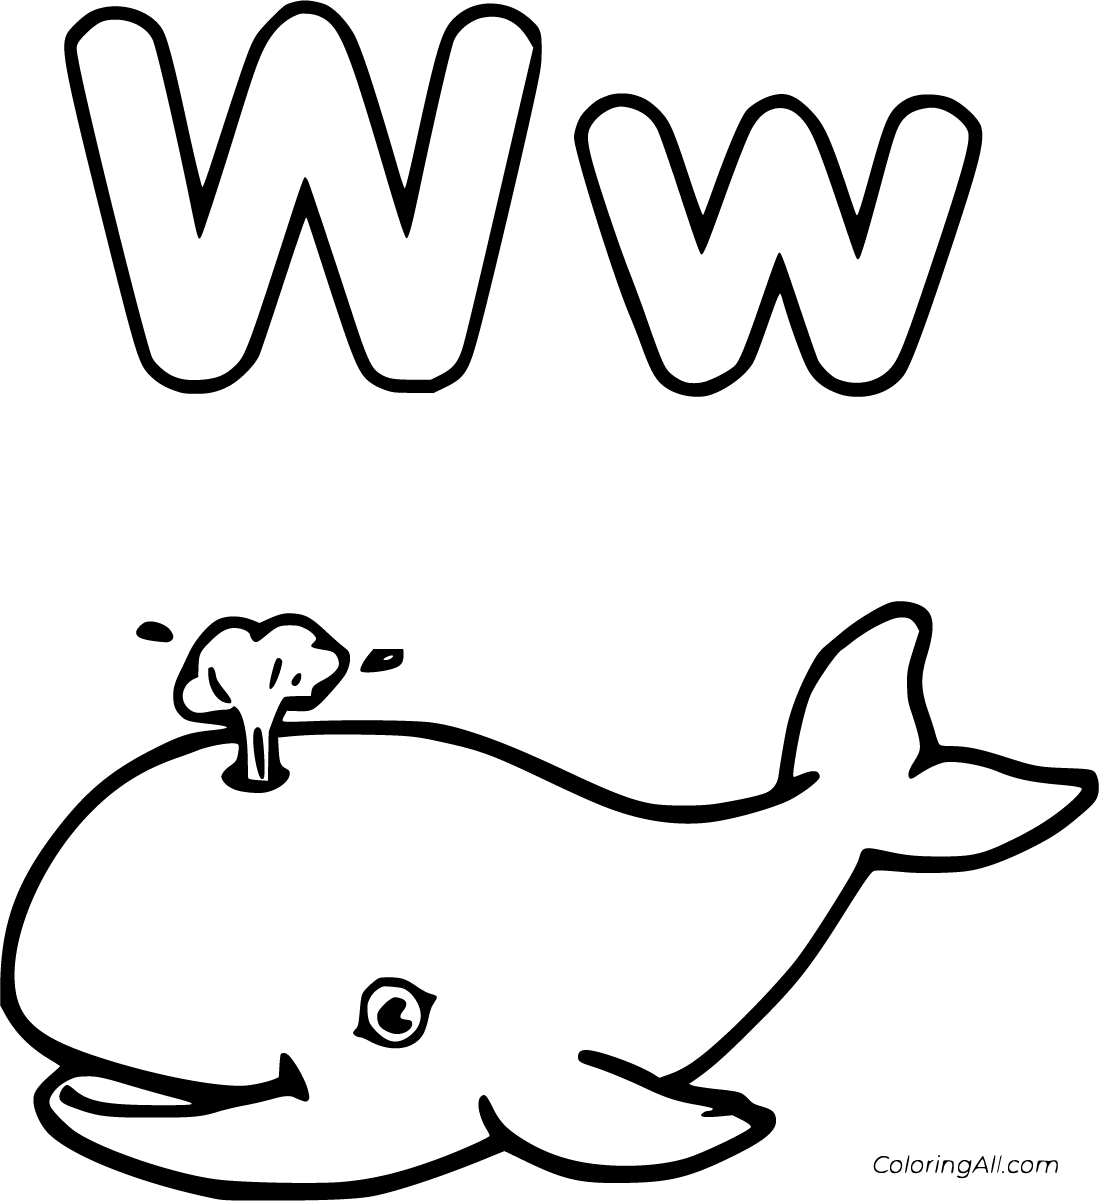 Letter W Coloring Pages - ColoringAll